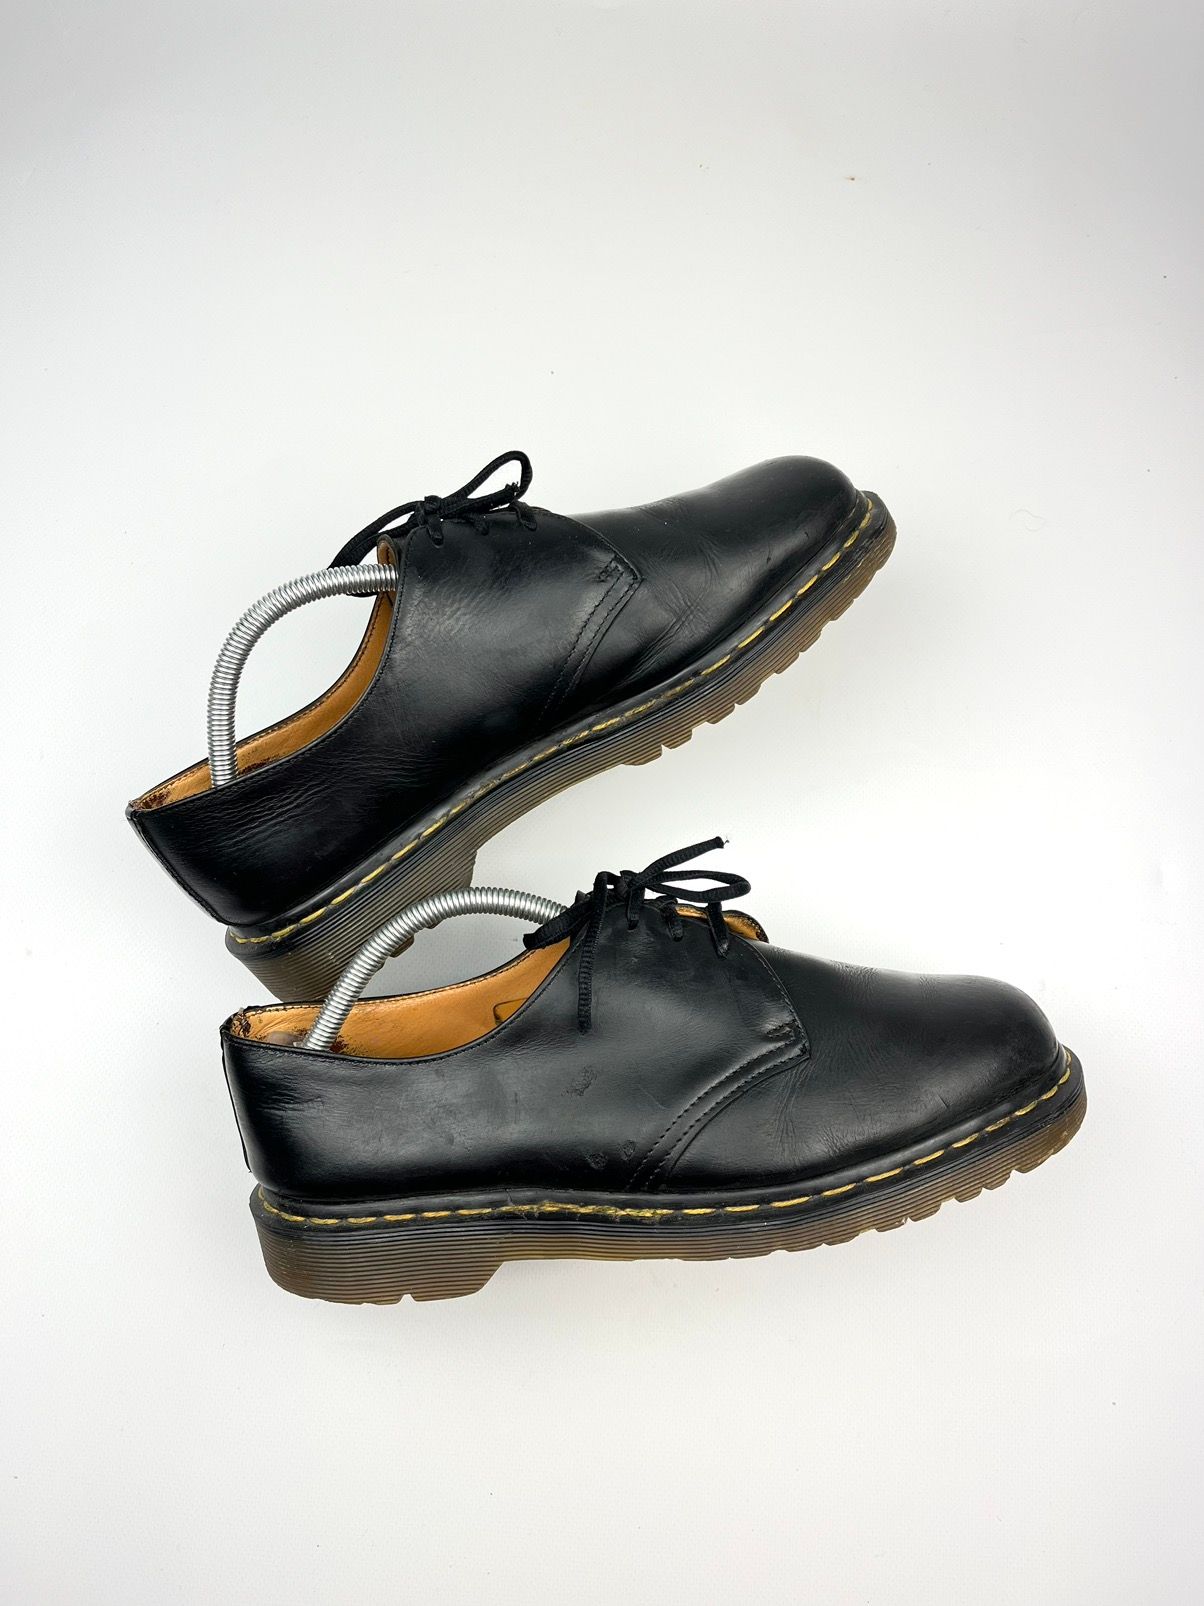 Pre-owned Dr. Martens Dr.martens 1460 Oxford Shoes Very Vintage Made In England In Black